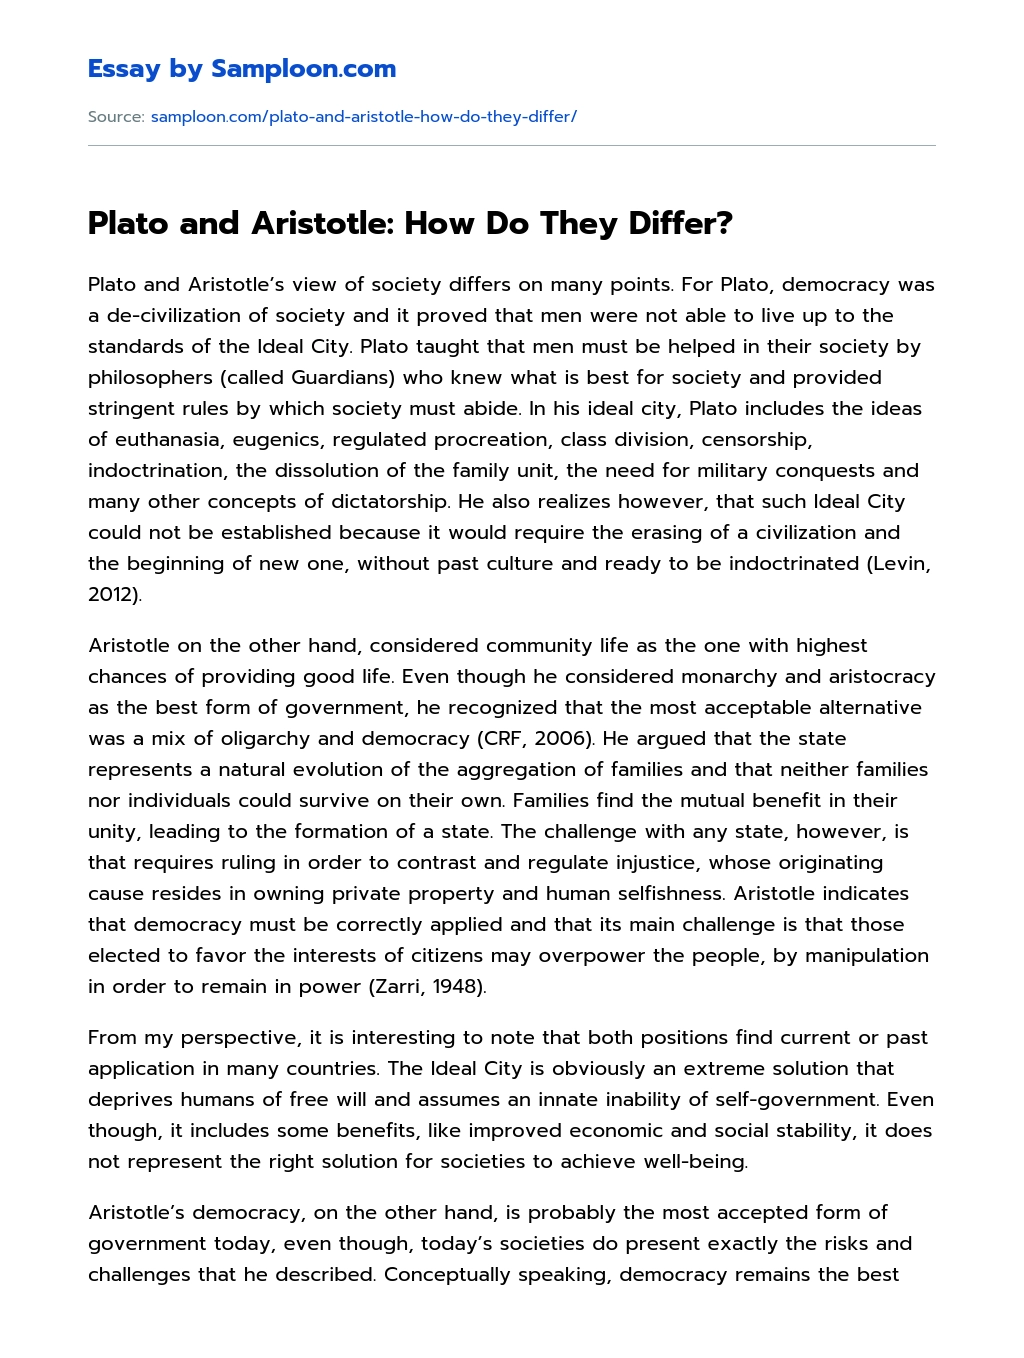 Plato and Aristotle: How Do They Differ? essay